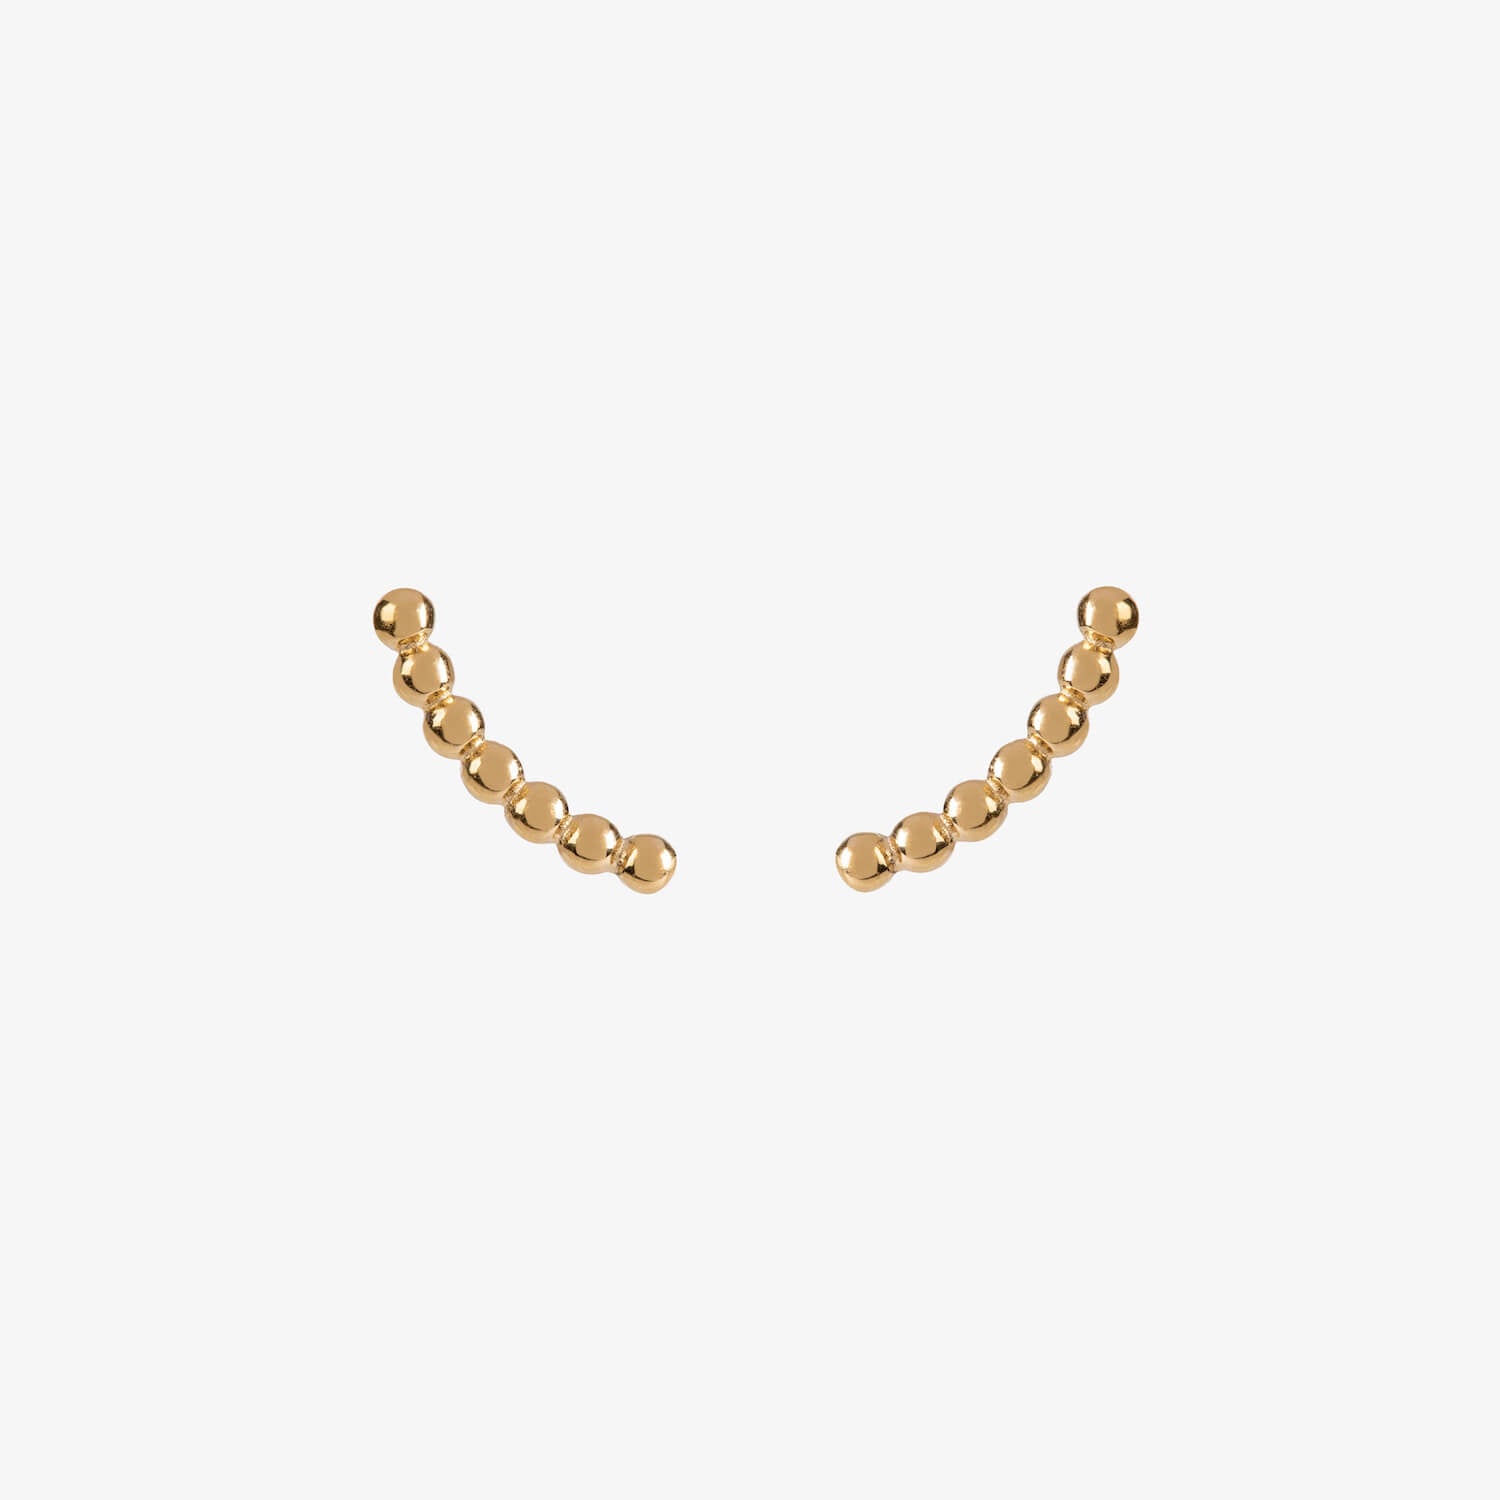 gold curved beaded ear climber stud earrings by matthew calvin on a white background